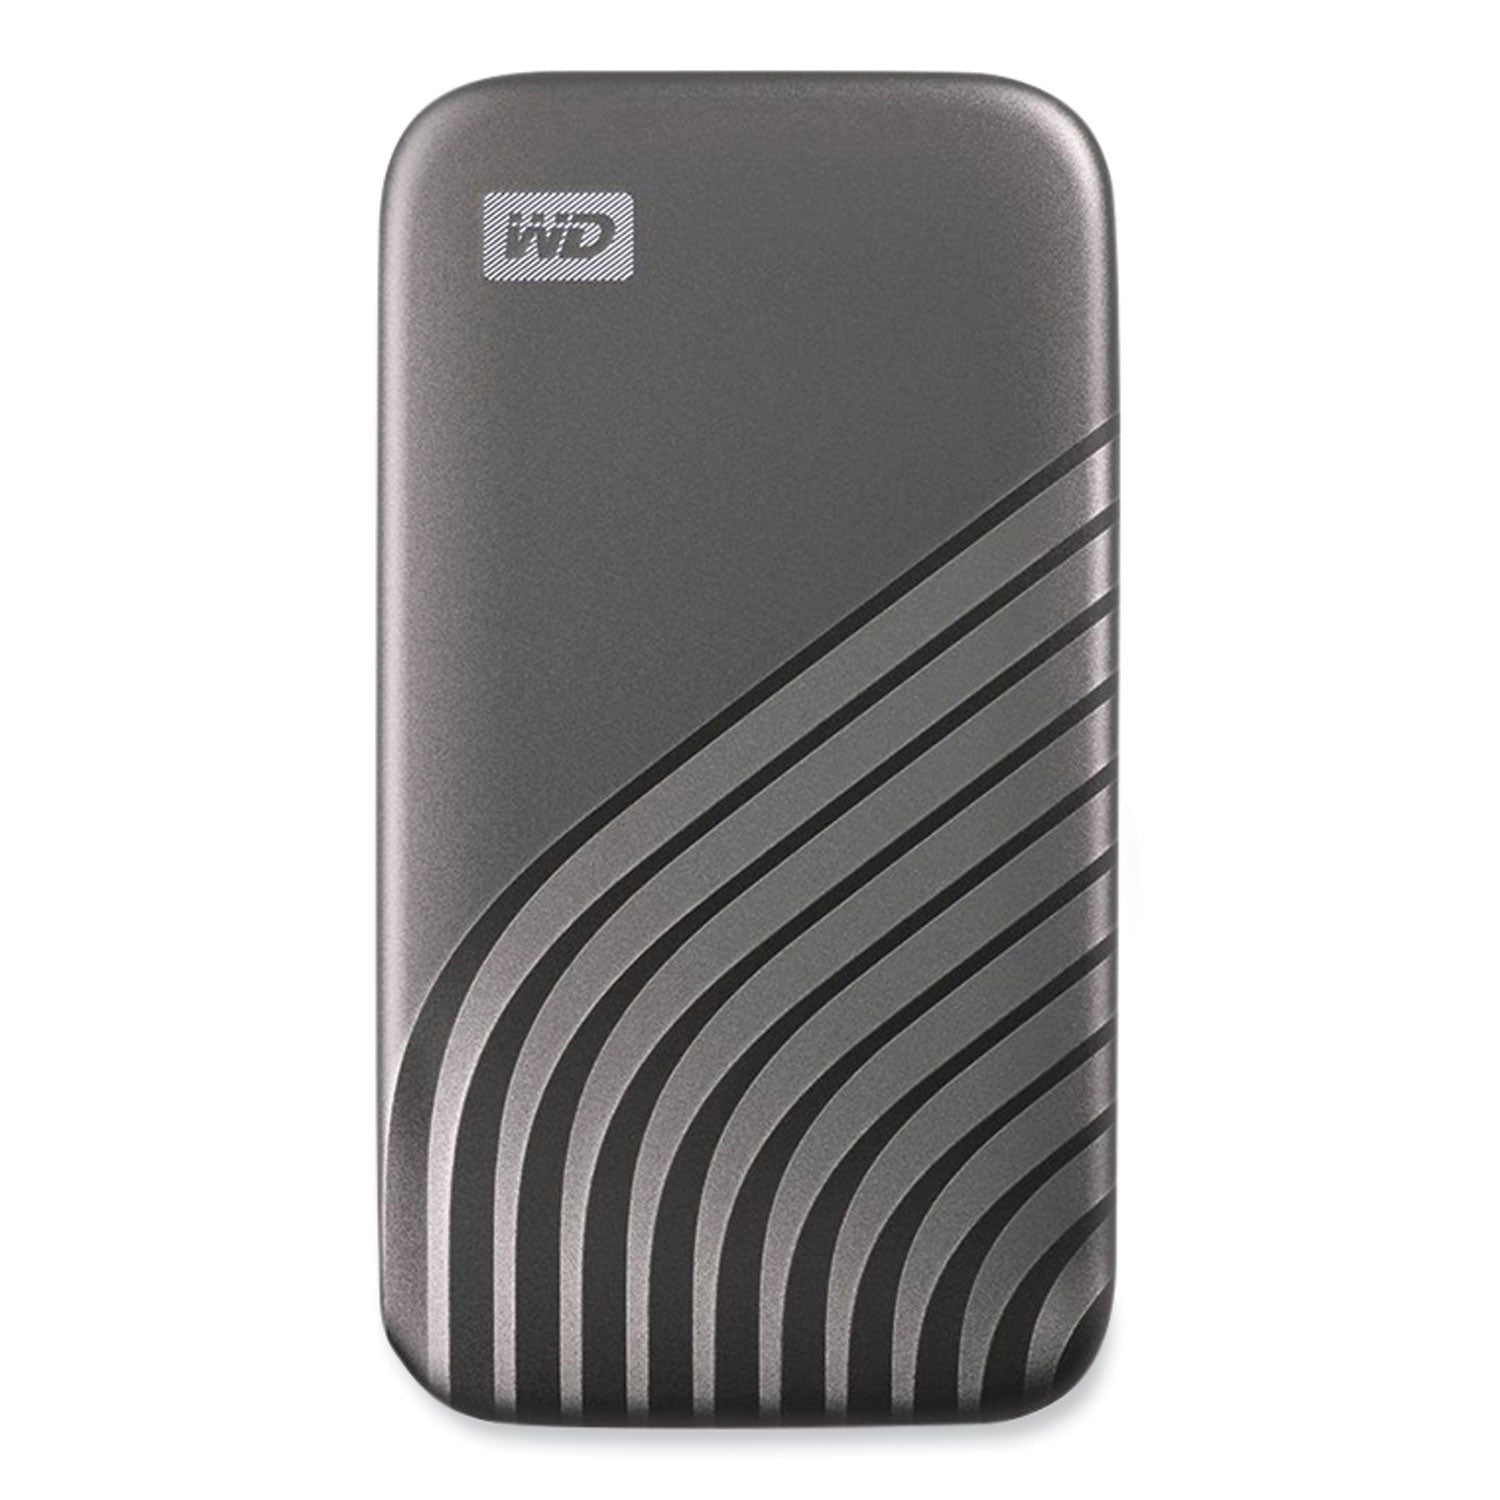 my-passport-external-solid-state-drive-500-gb-usb-32-gray_wdcagf5000agy - 1